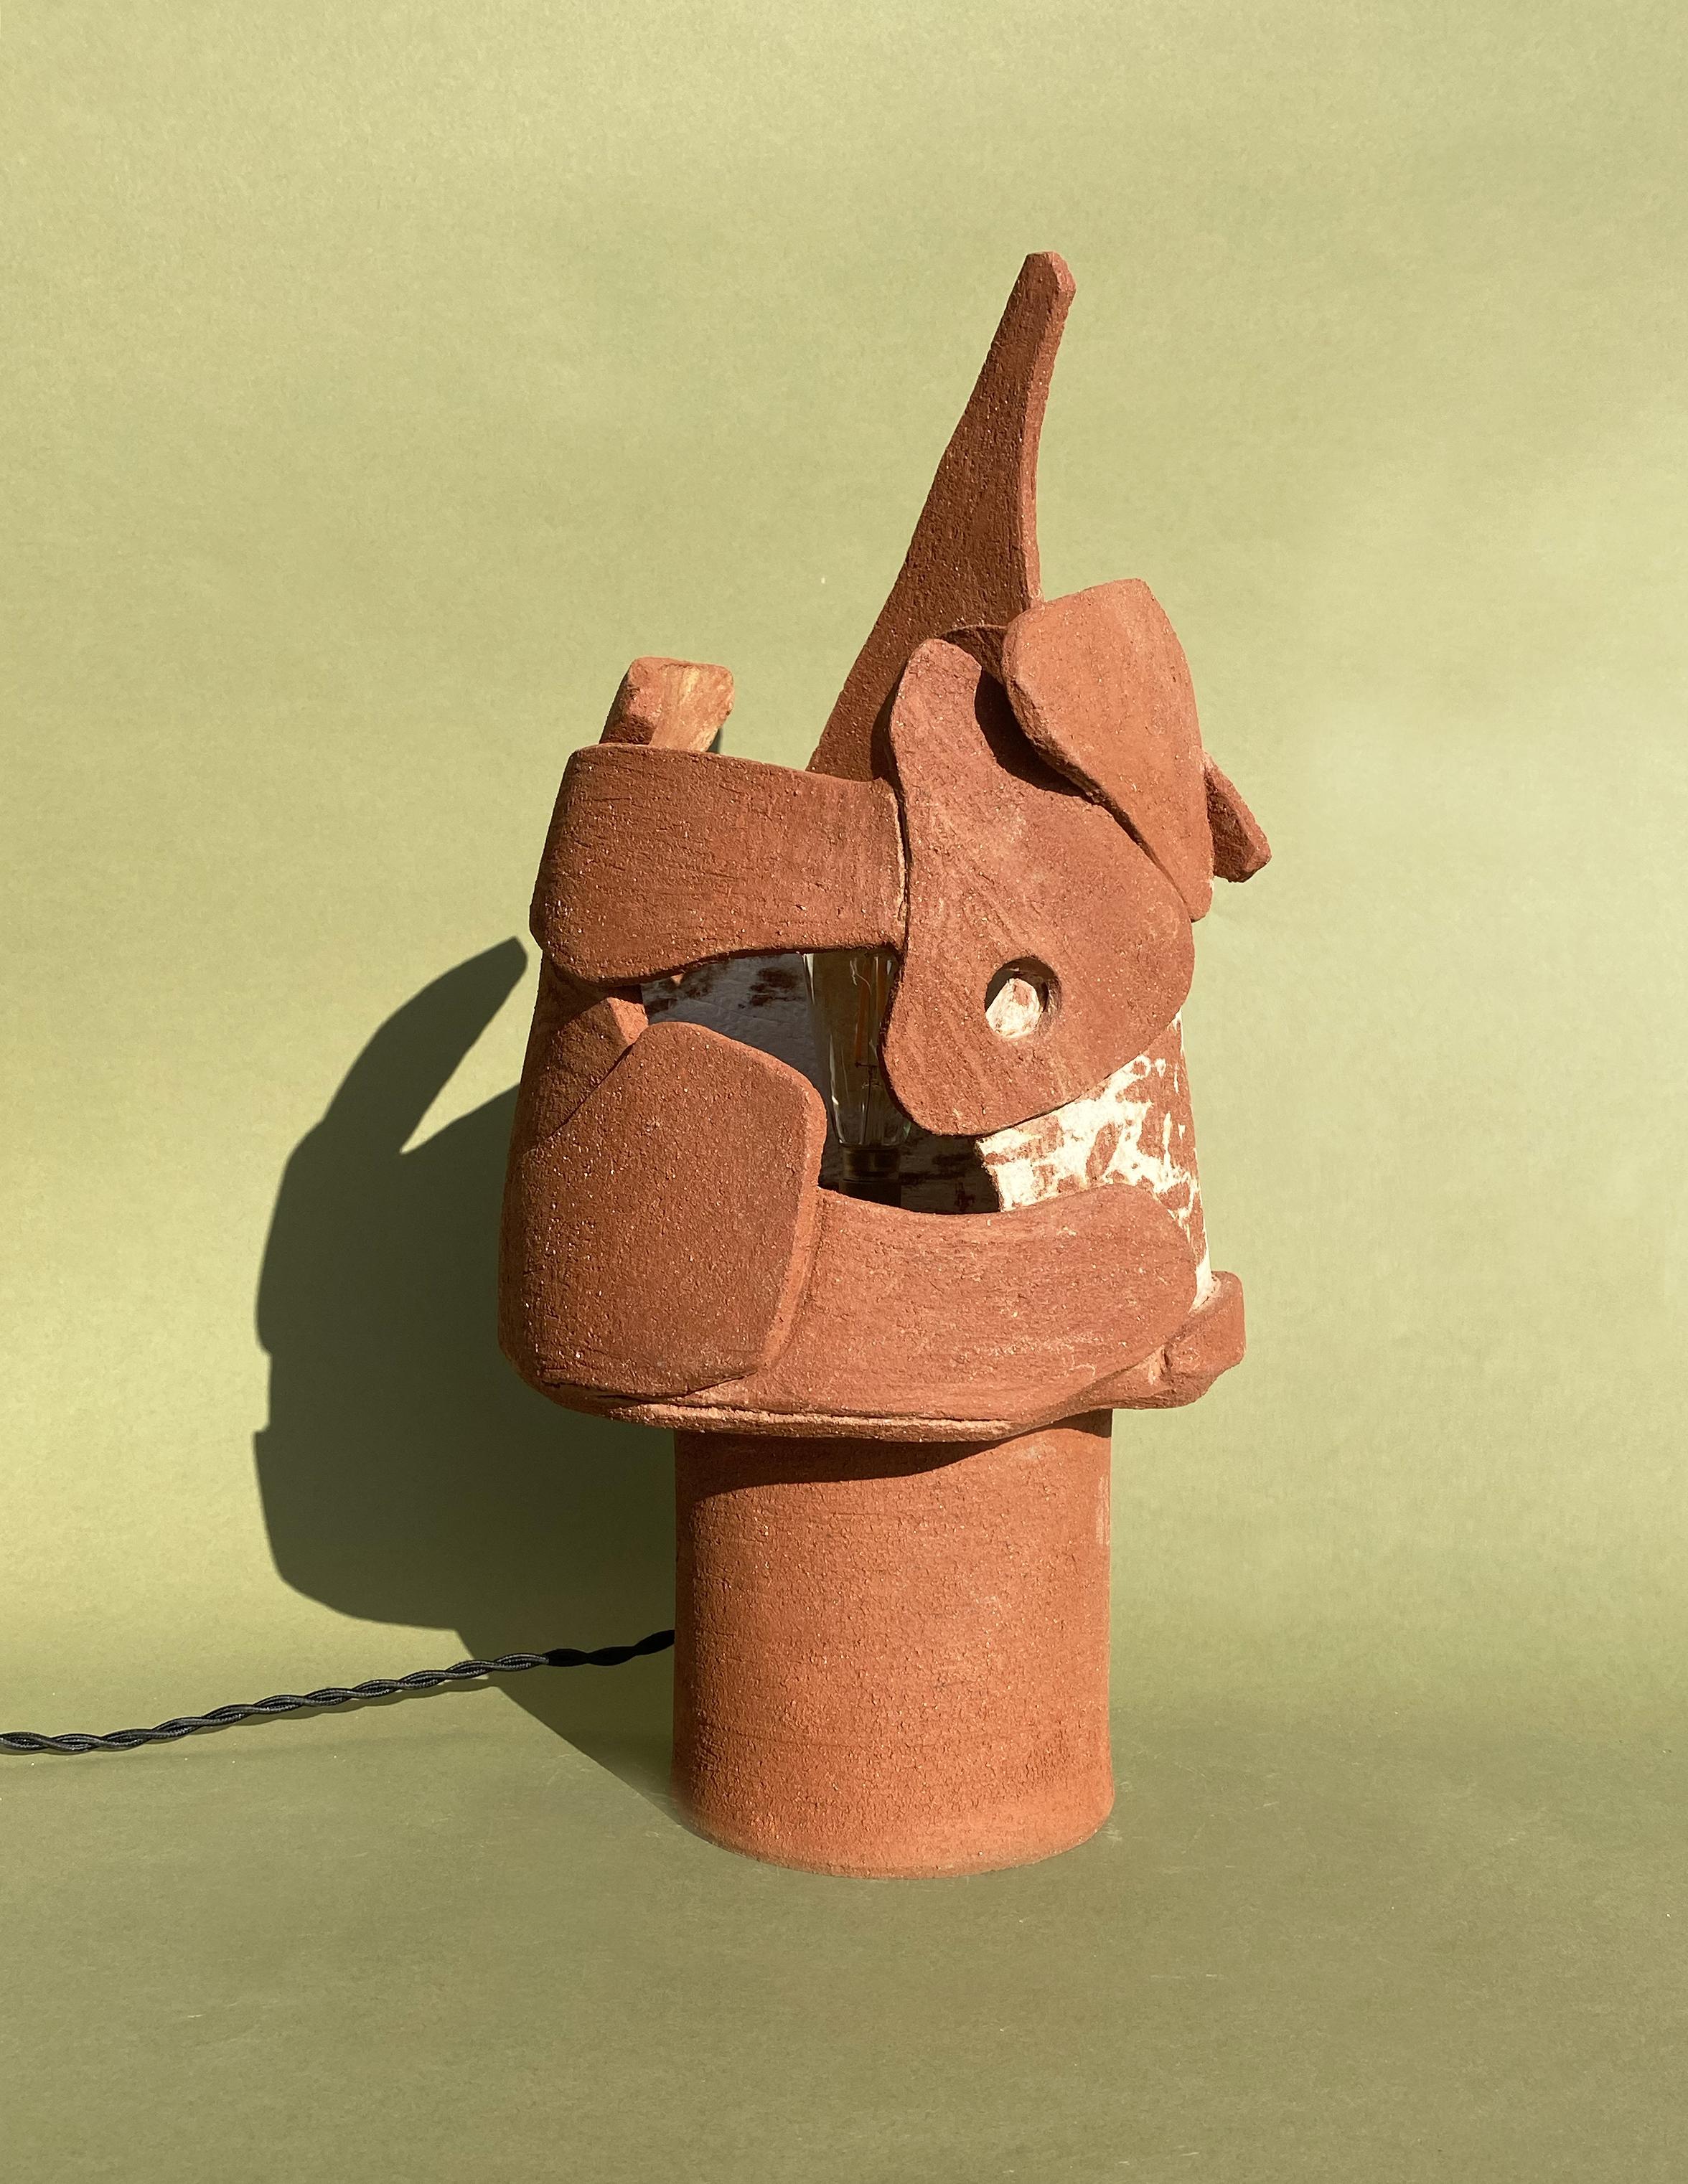 Clay Totem Lamp by Olivia Cognet